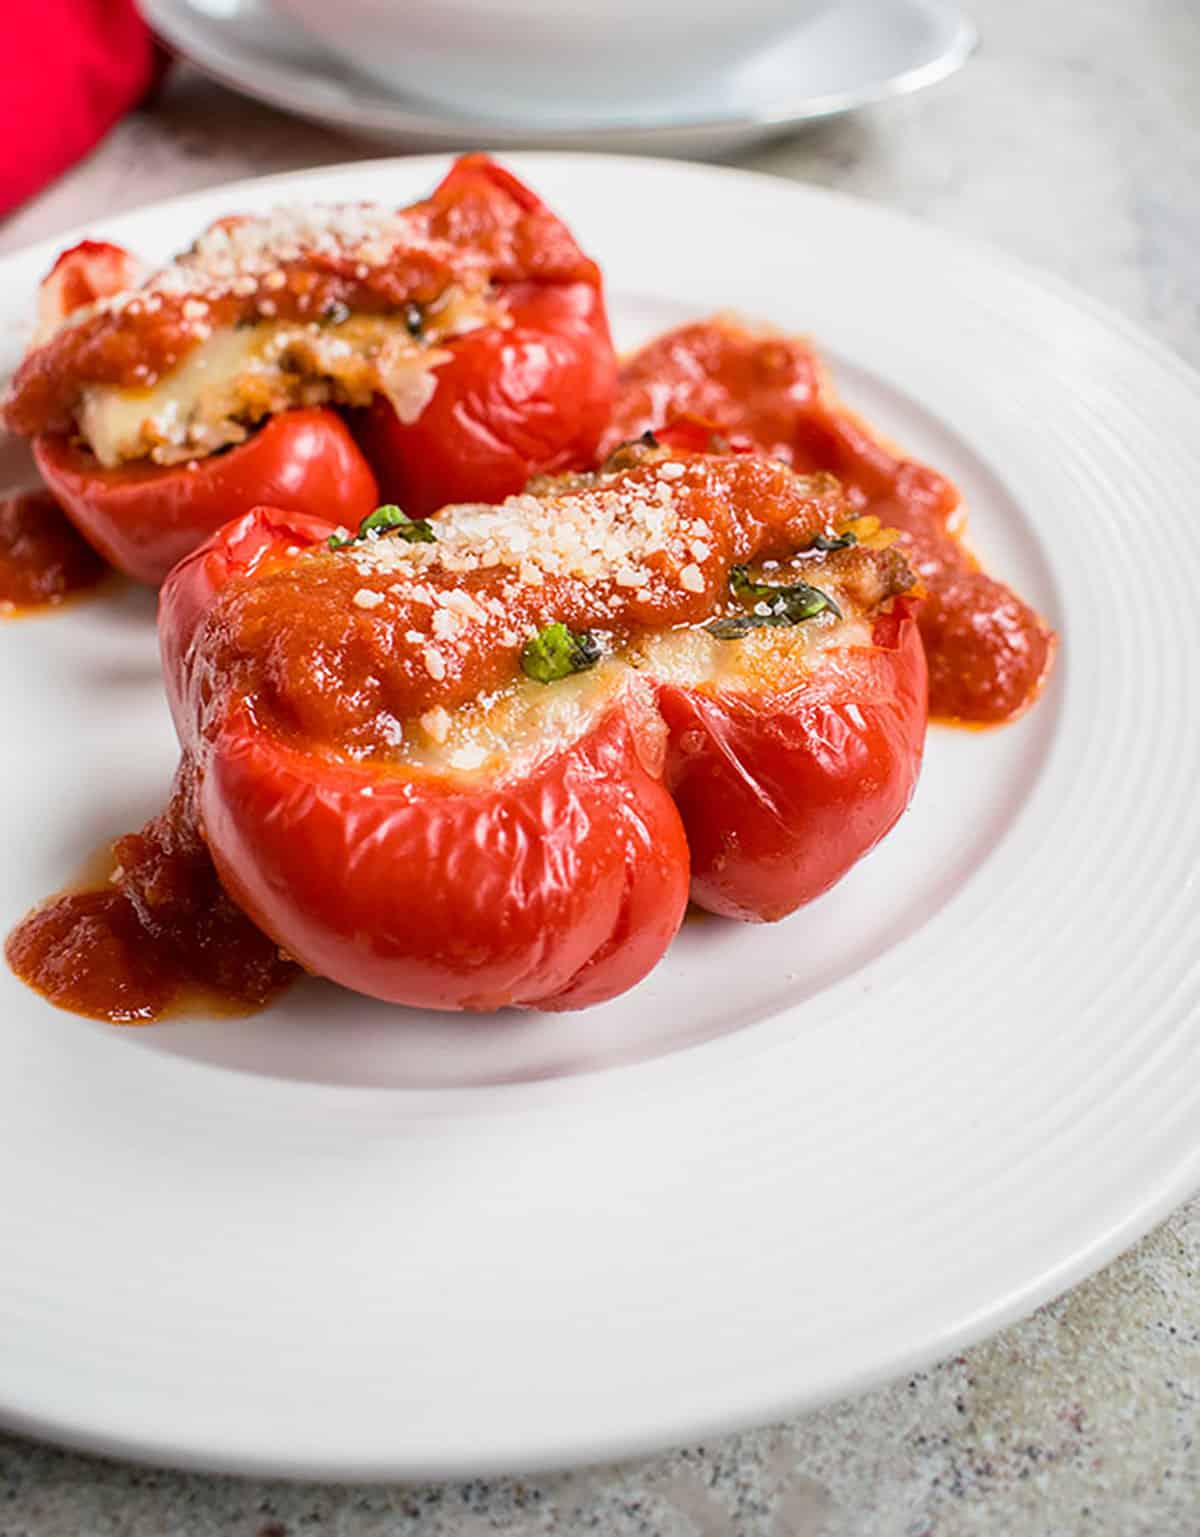 plate of Italian stuffed peppers with marinara and grated cheese